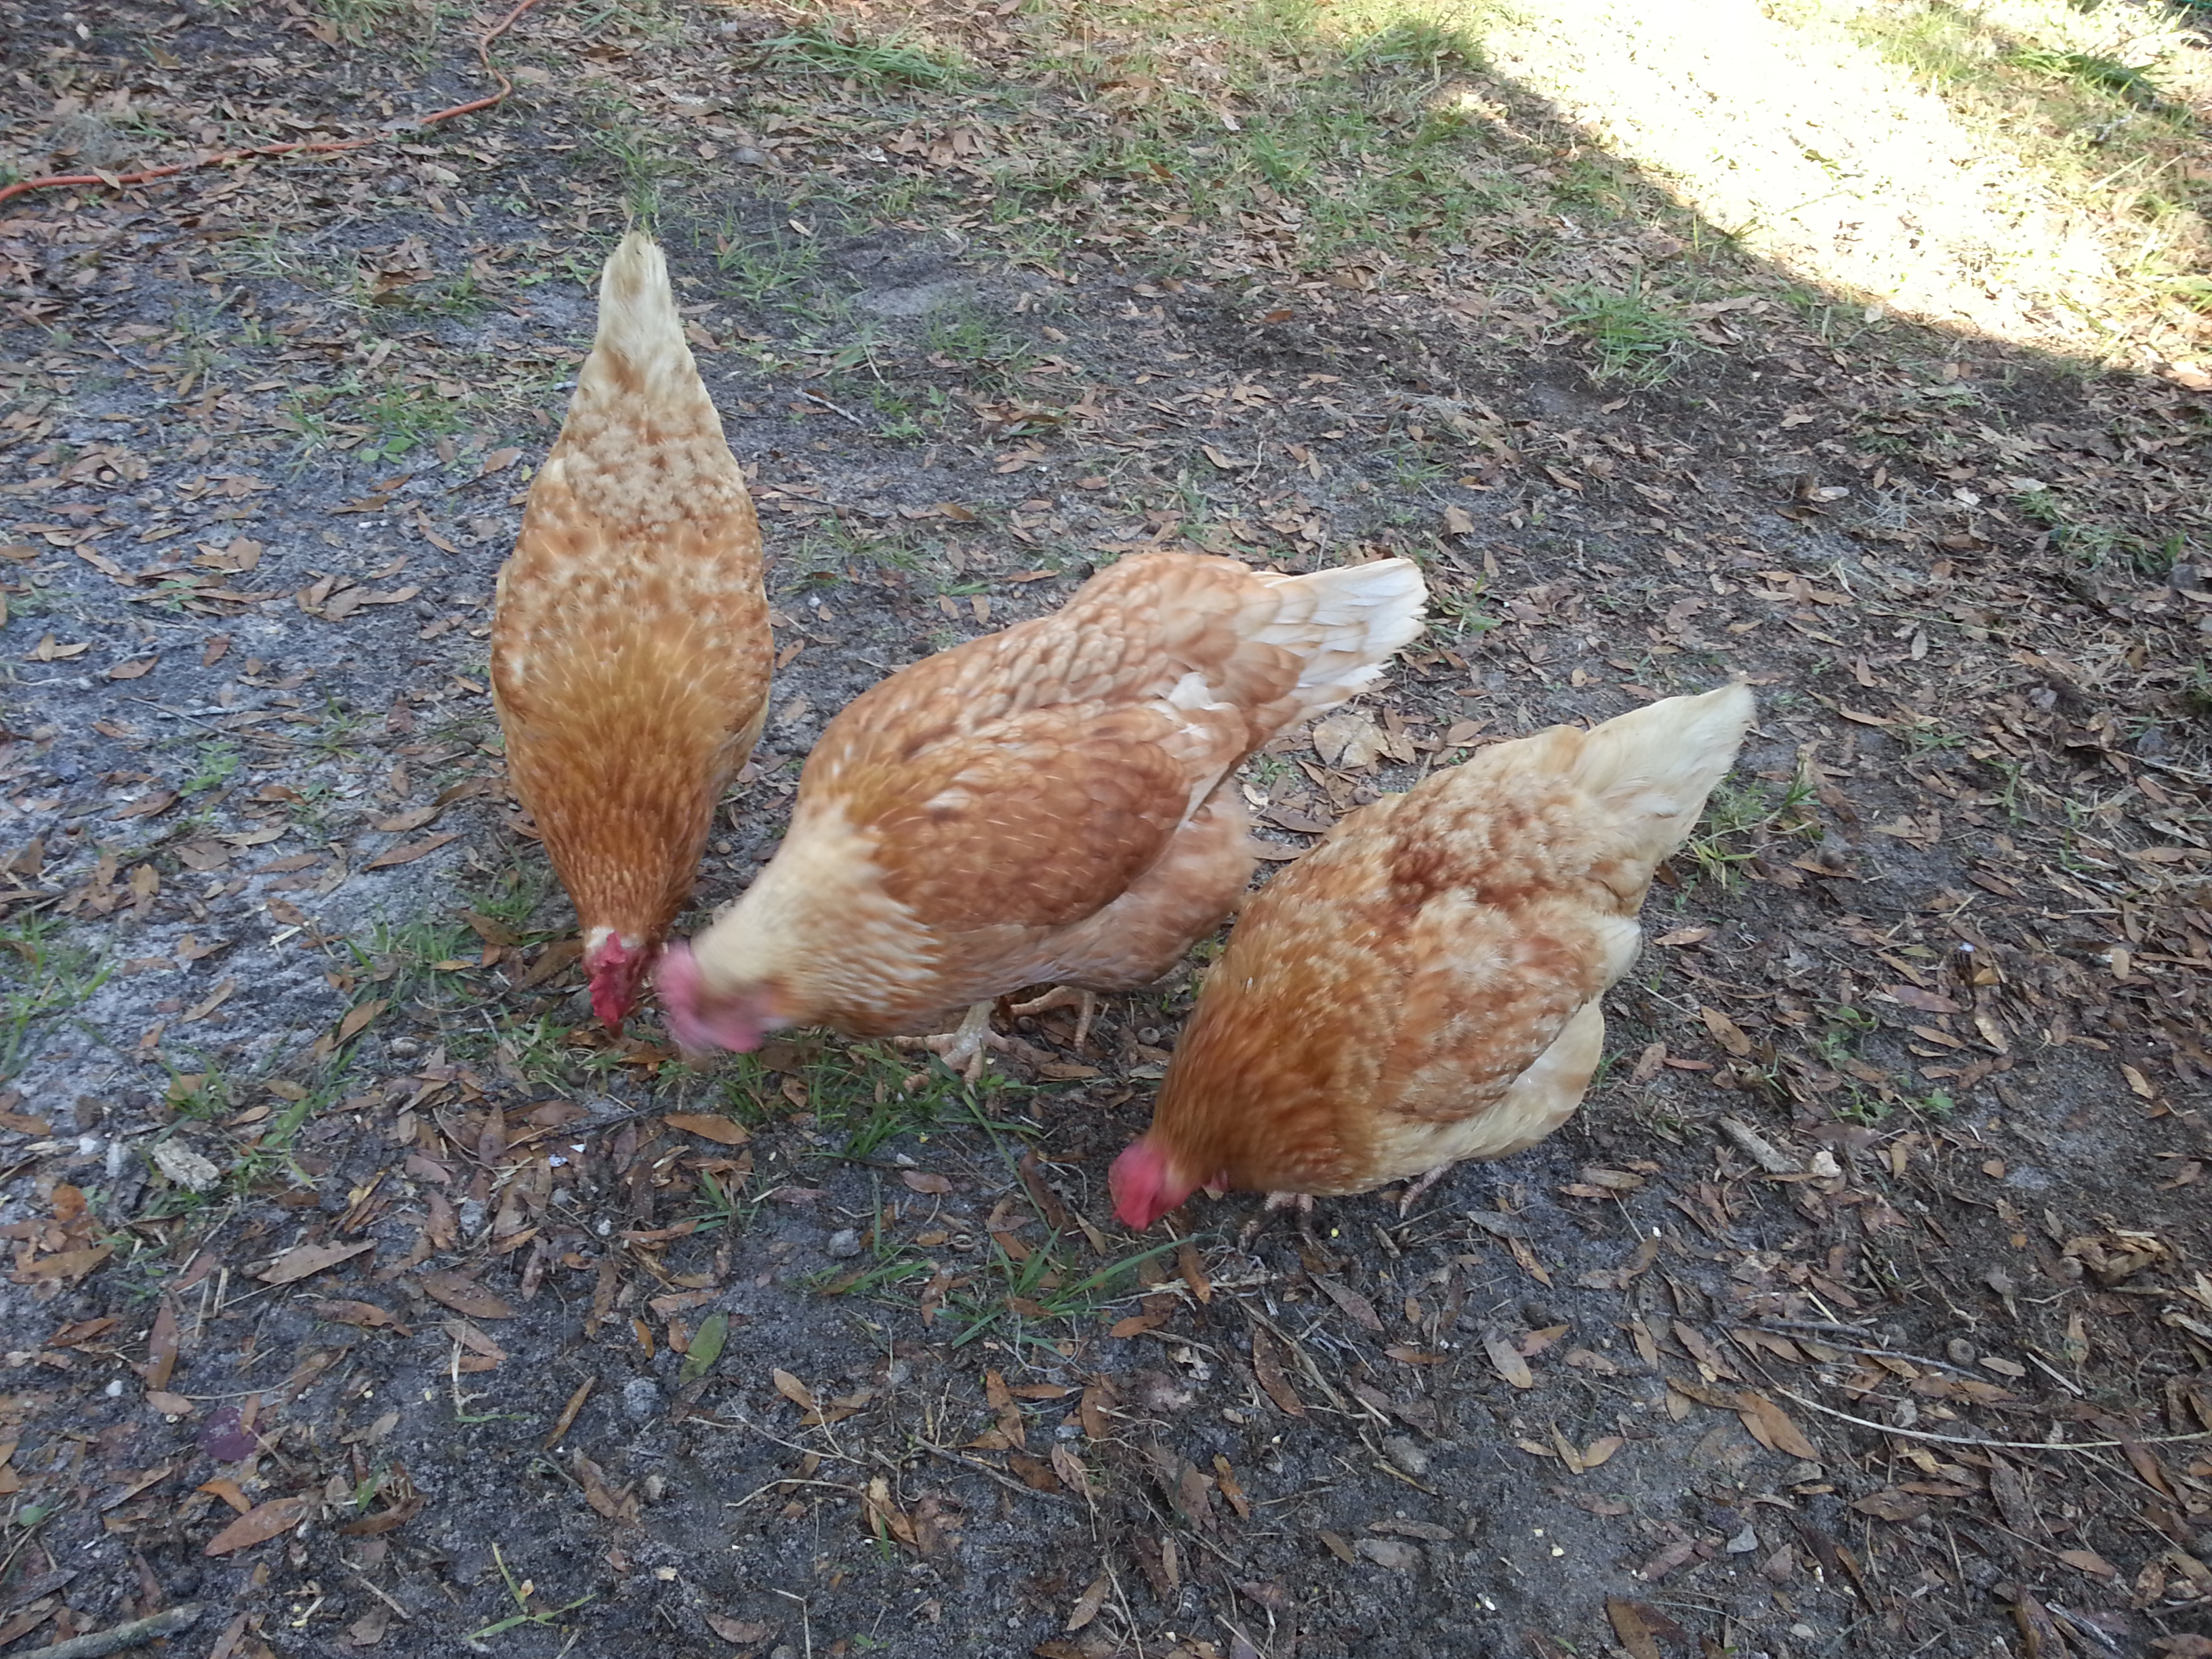 My 2nd group of chickens